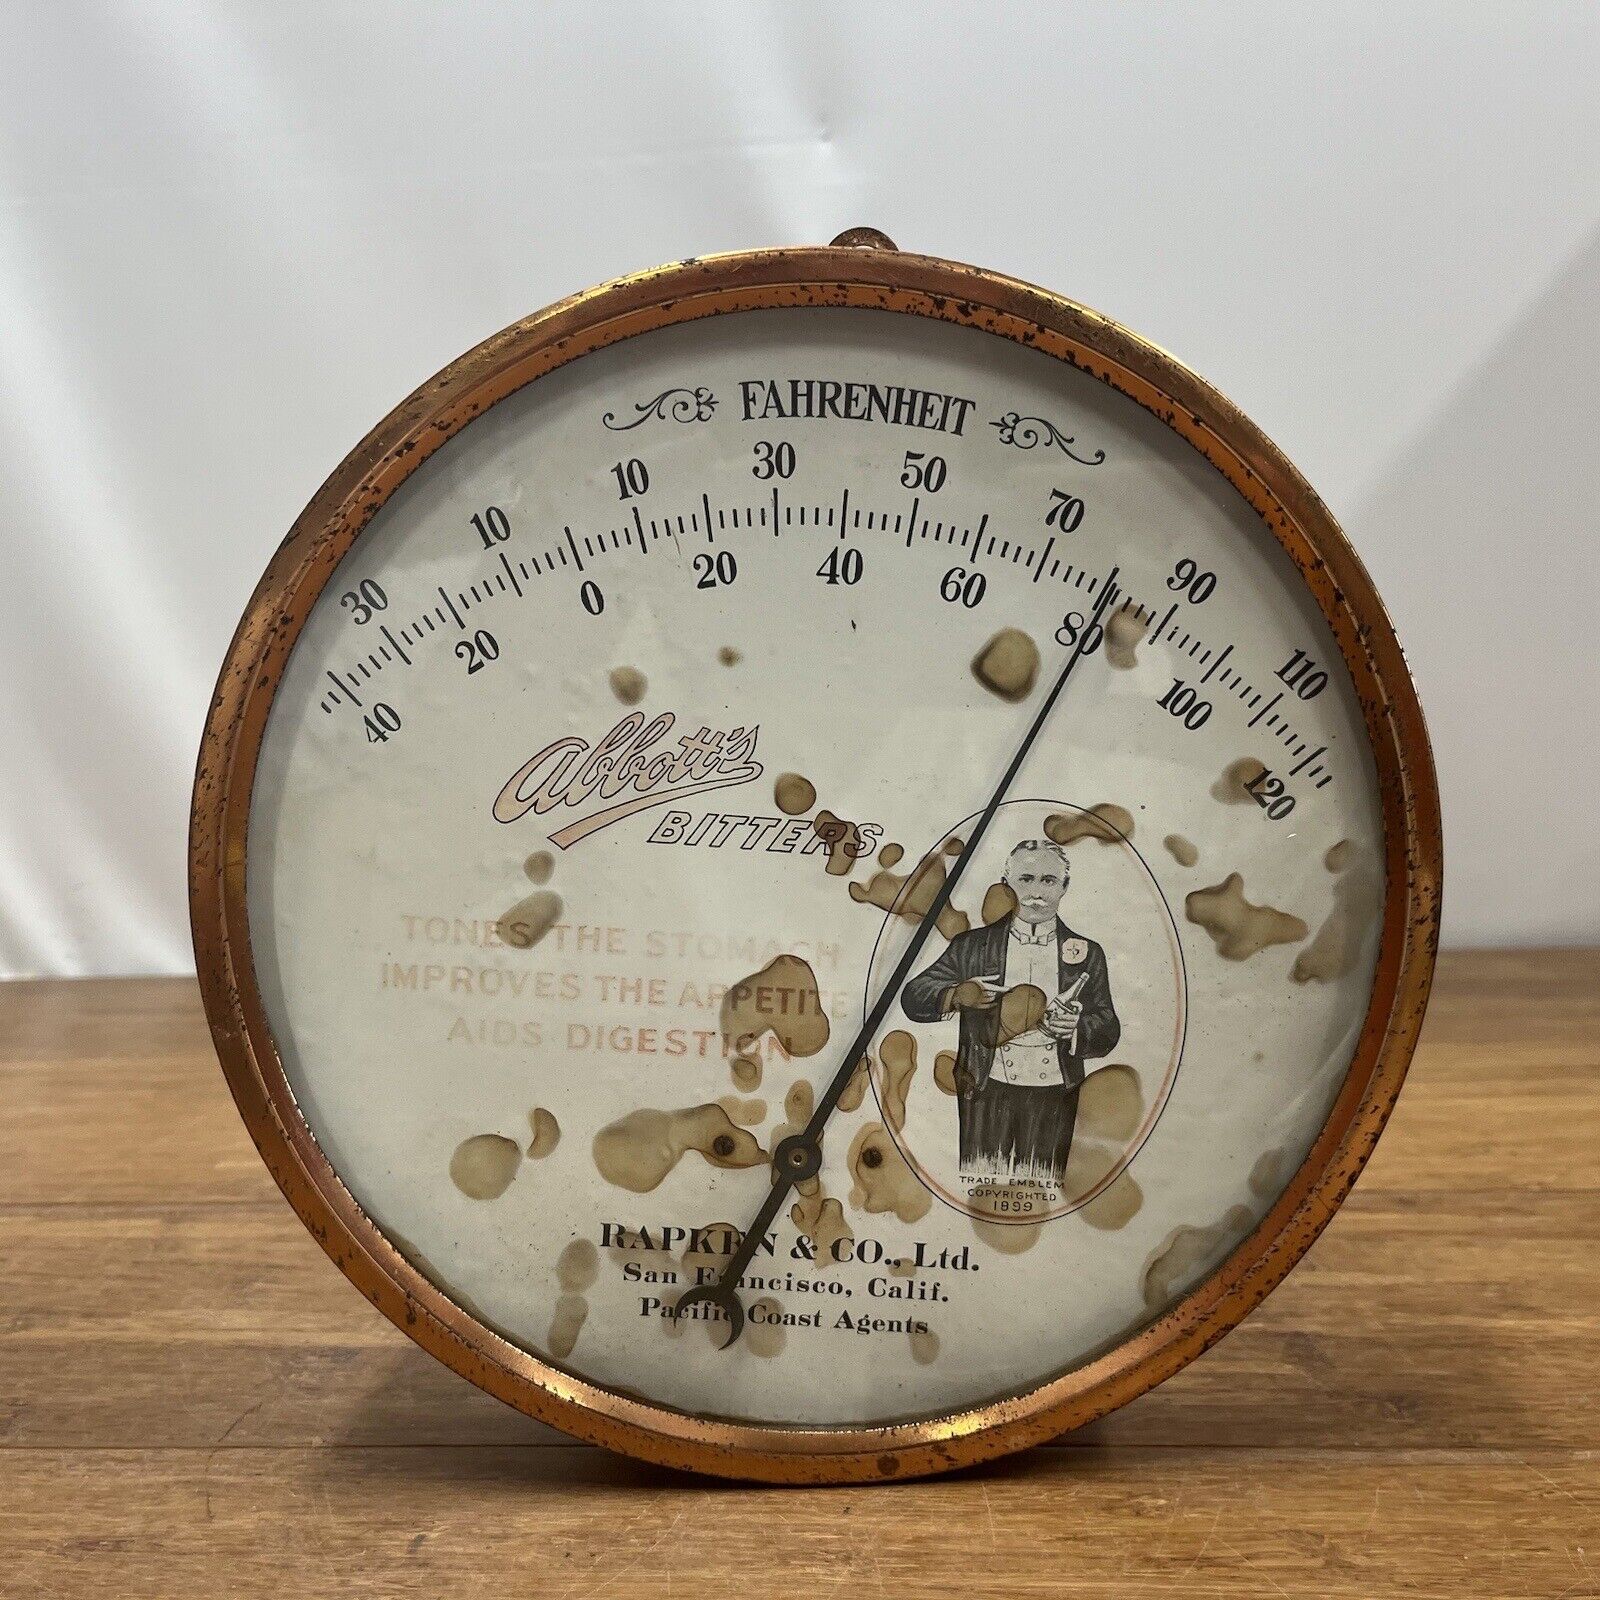 VTG Antique ABBOTTS BITTERS Thermometer Sign Tones Stomach Appetite Aids Digest